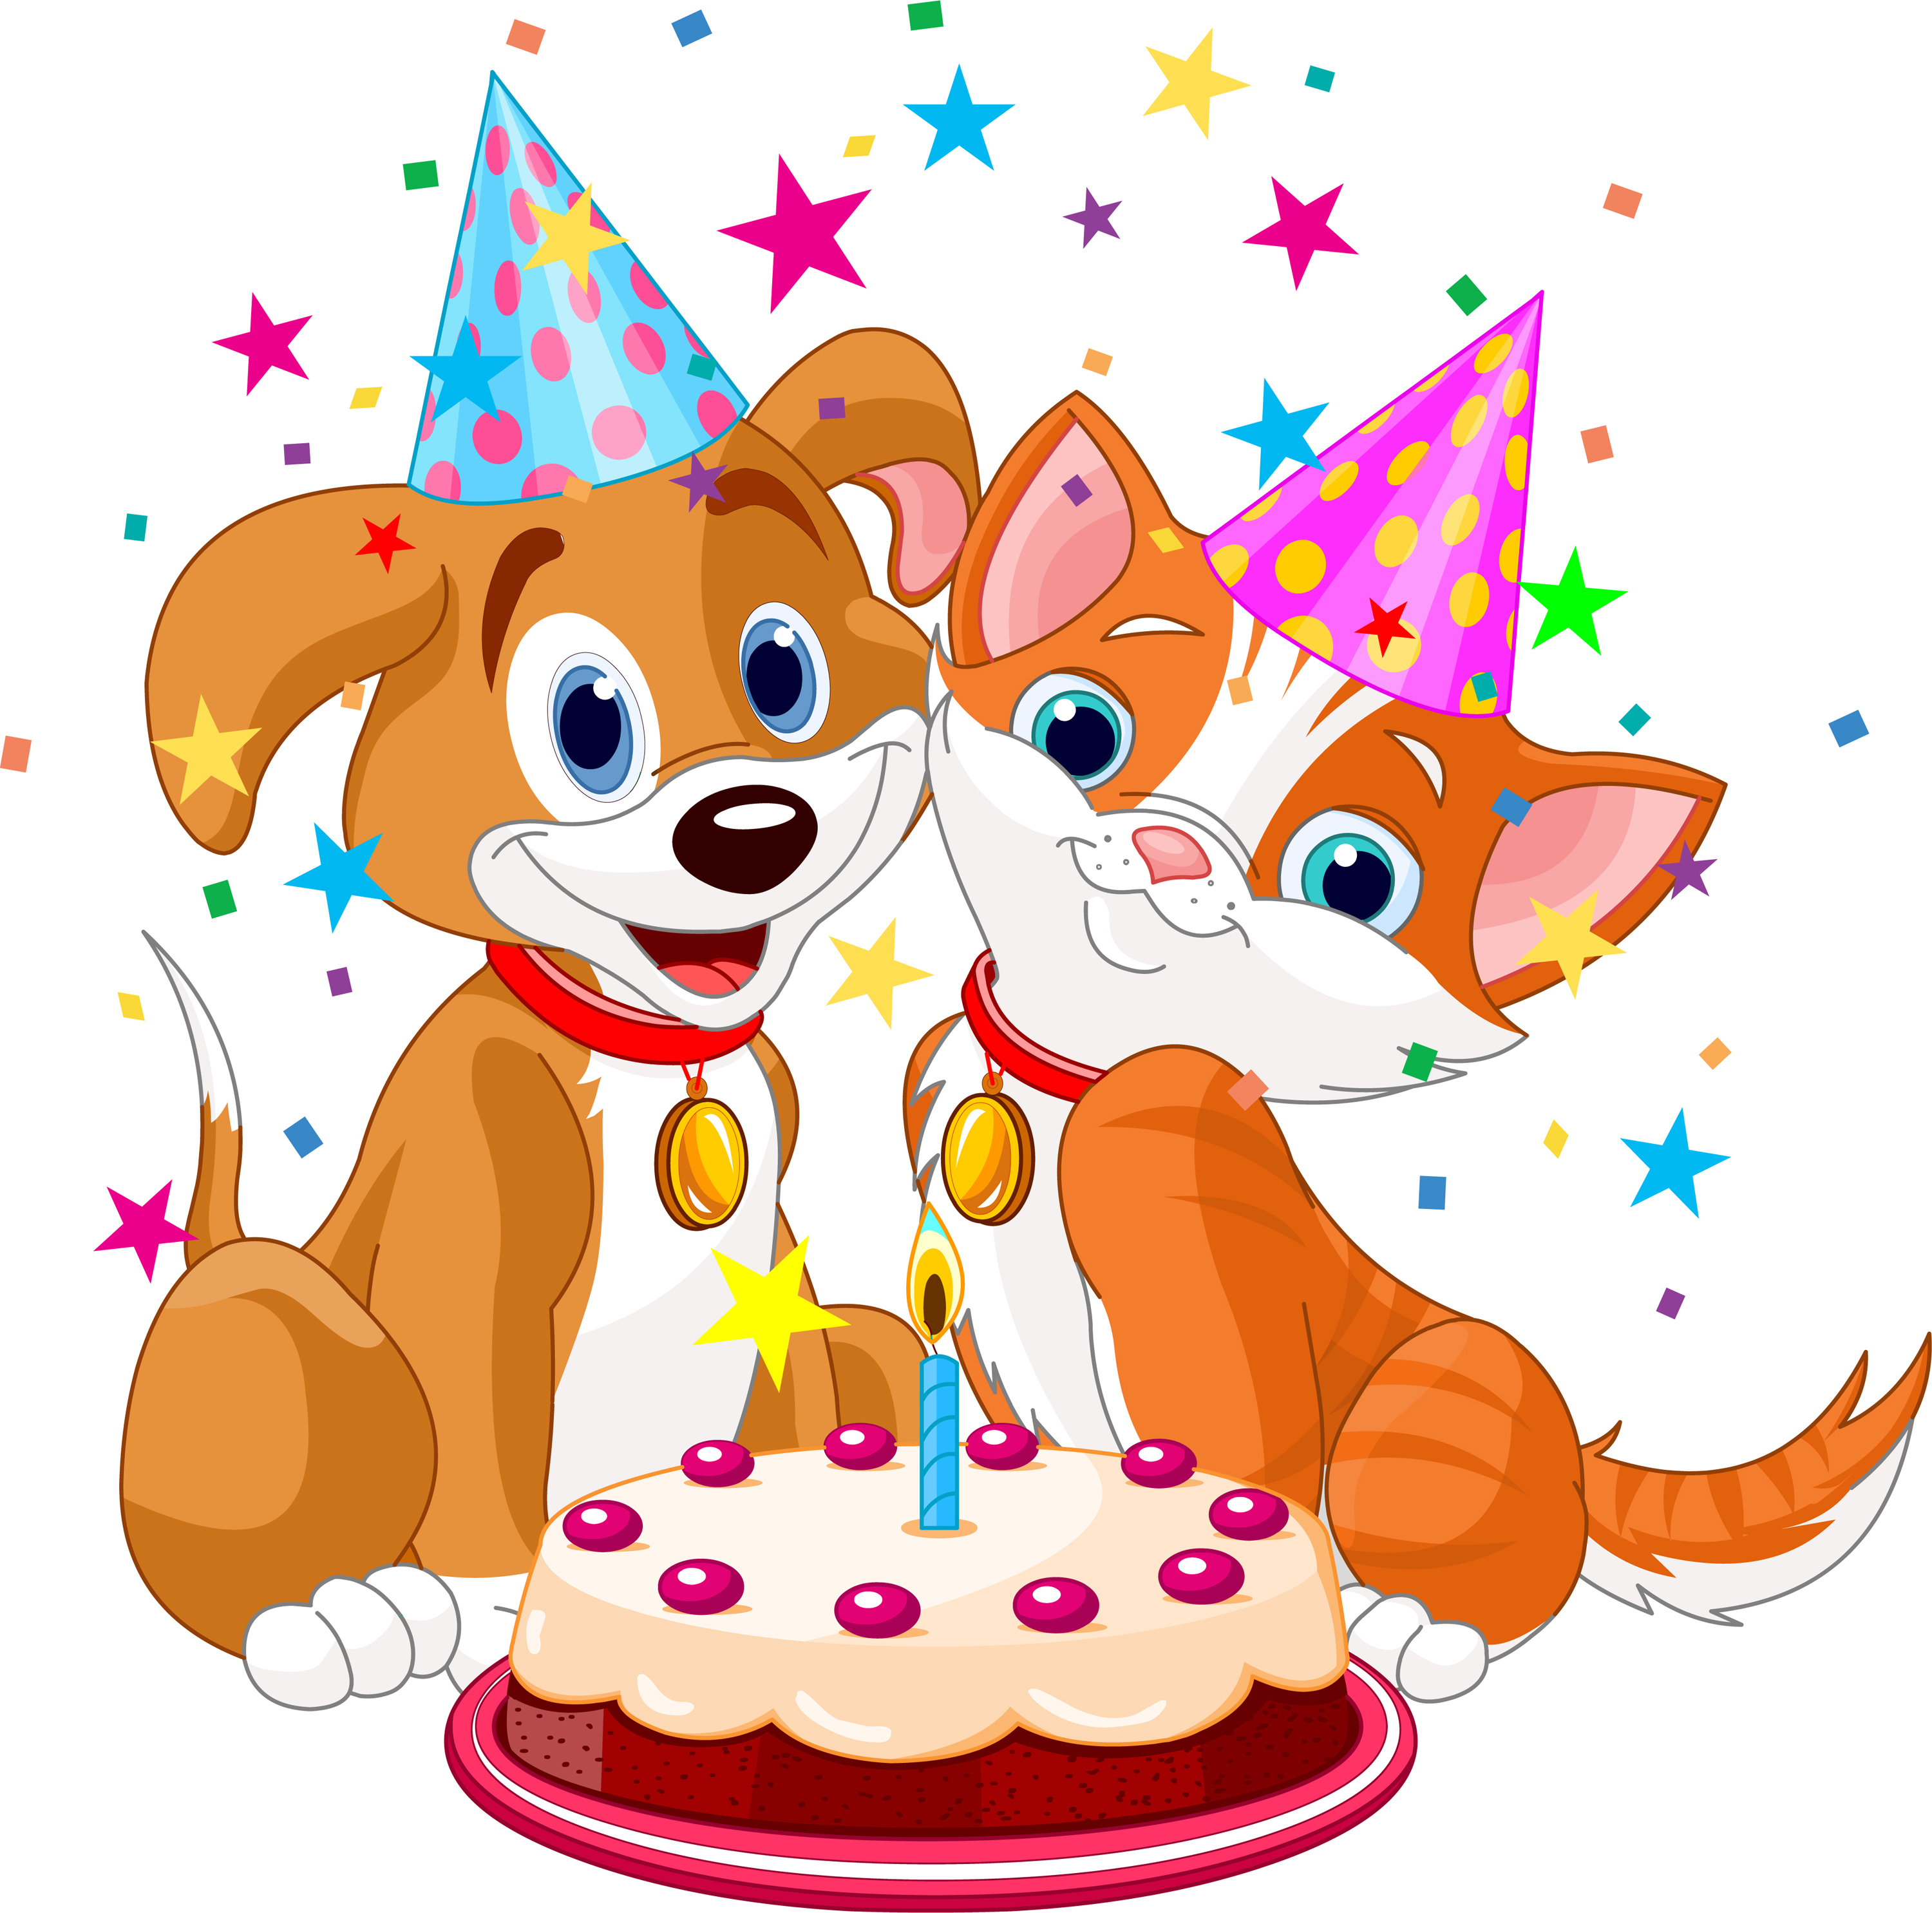 The cat and dog celebrate birthday. Vector illustration